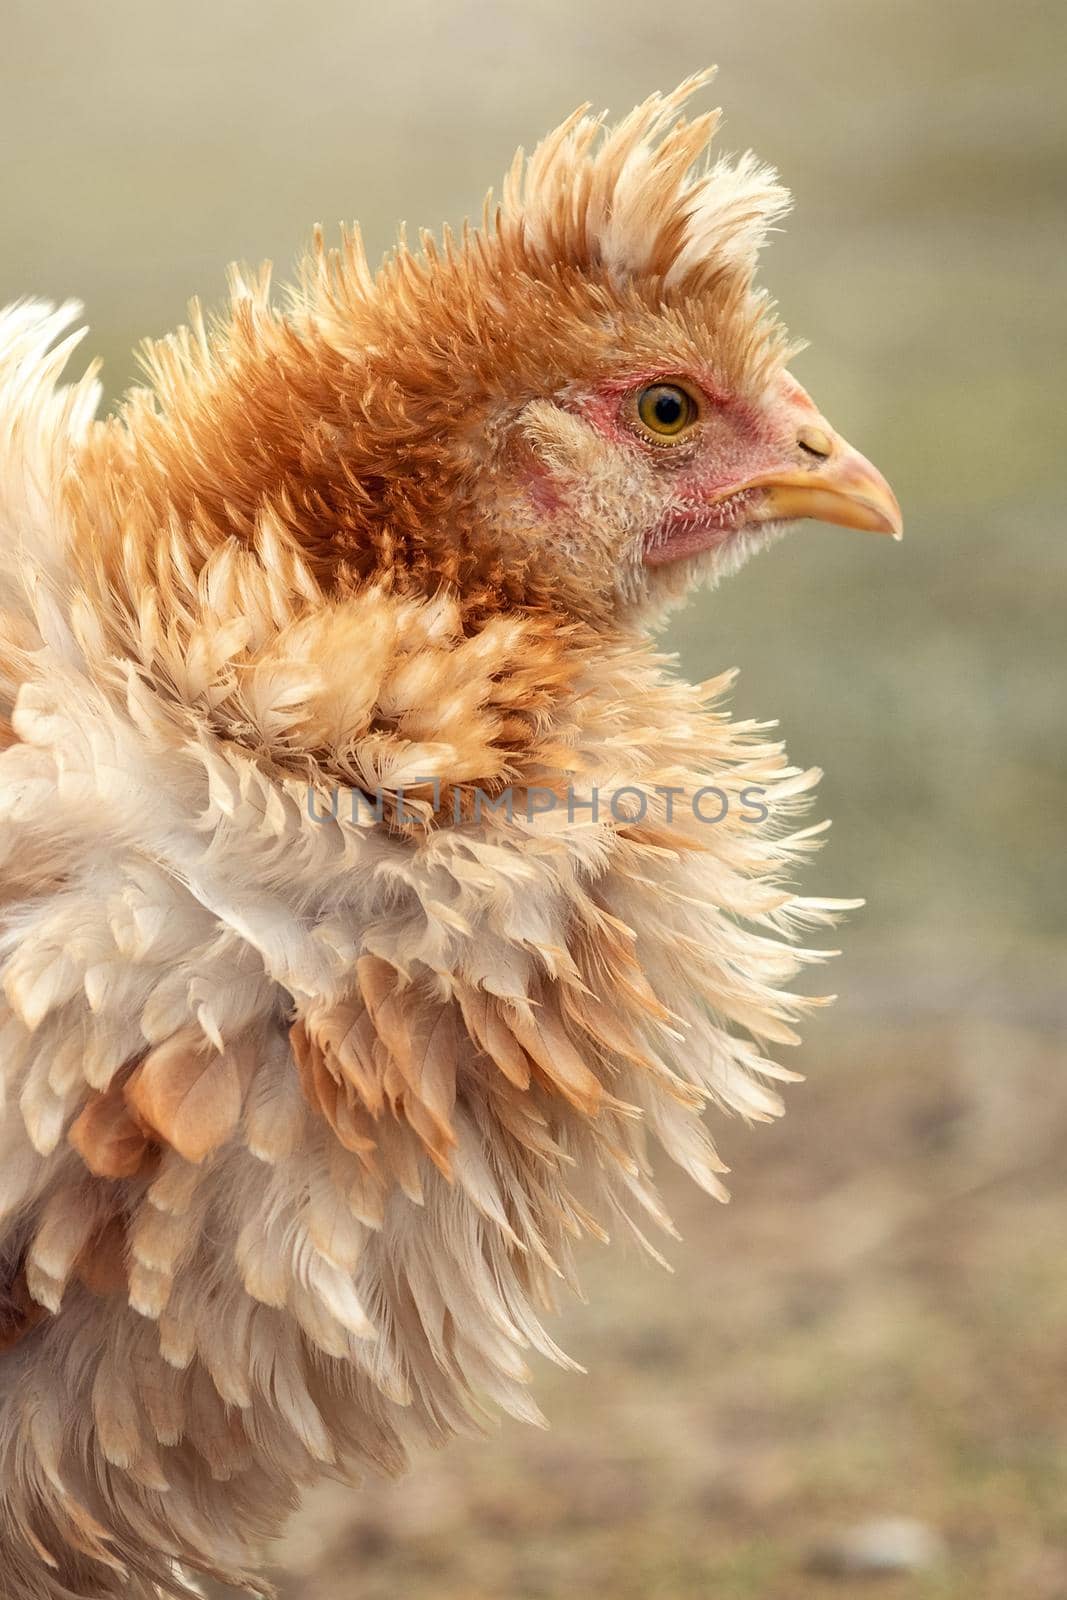 Amazing shaggy light brown hen with tuft by Lincikas